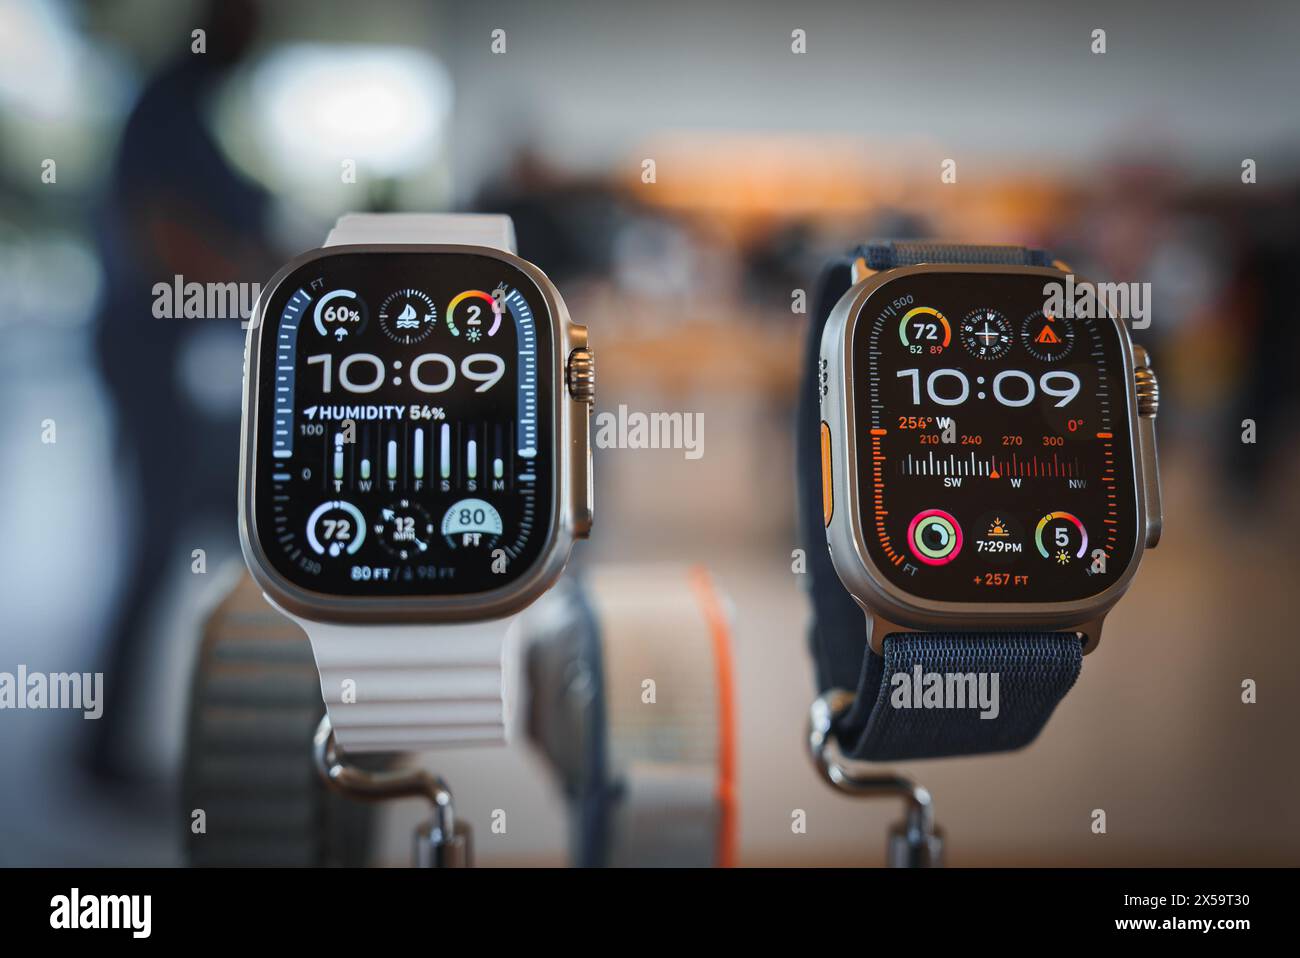 Apple Watches with Intricate Watch Faces, Apple Store Interior Stock Photo